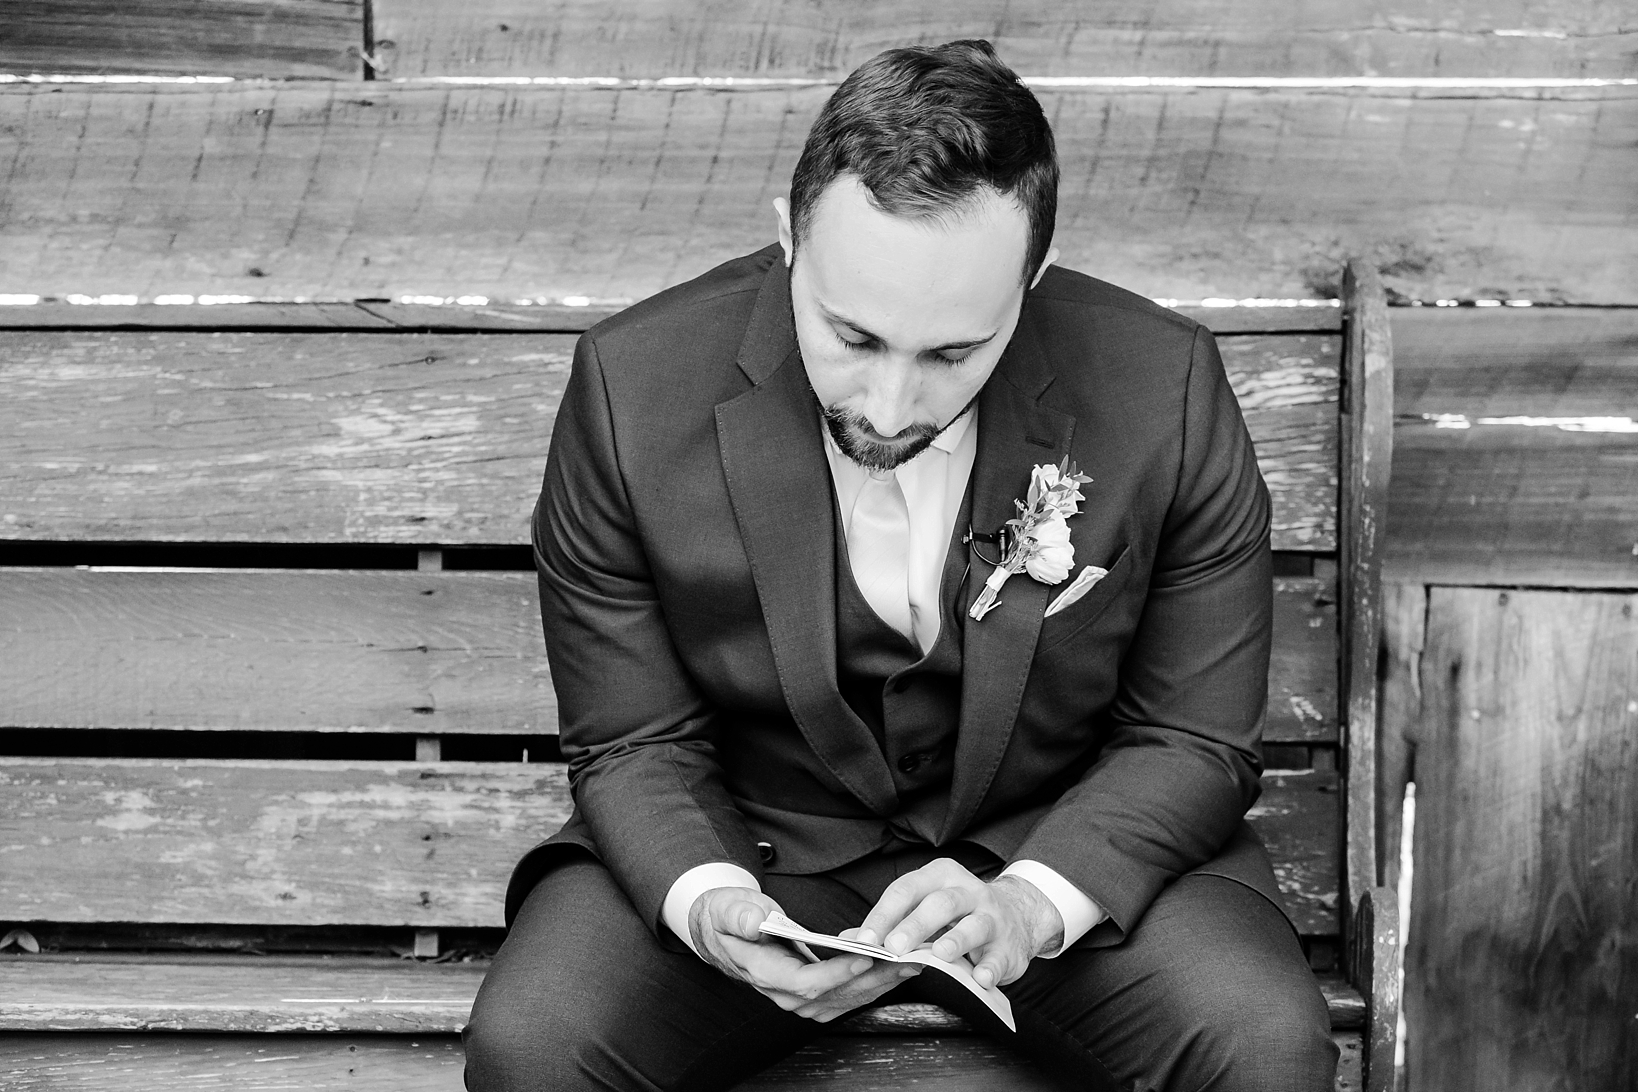 The Groom reads a letter from his Bride before their wedding day